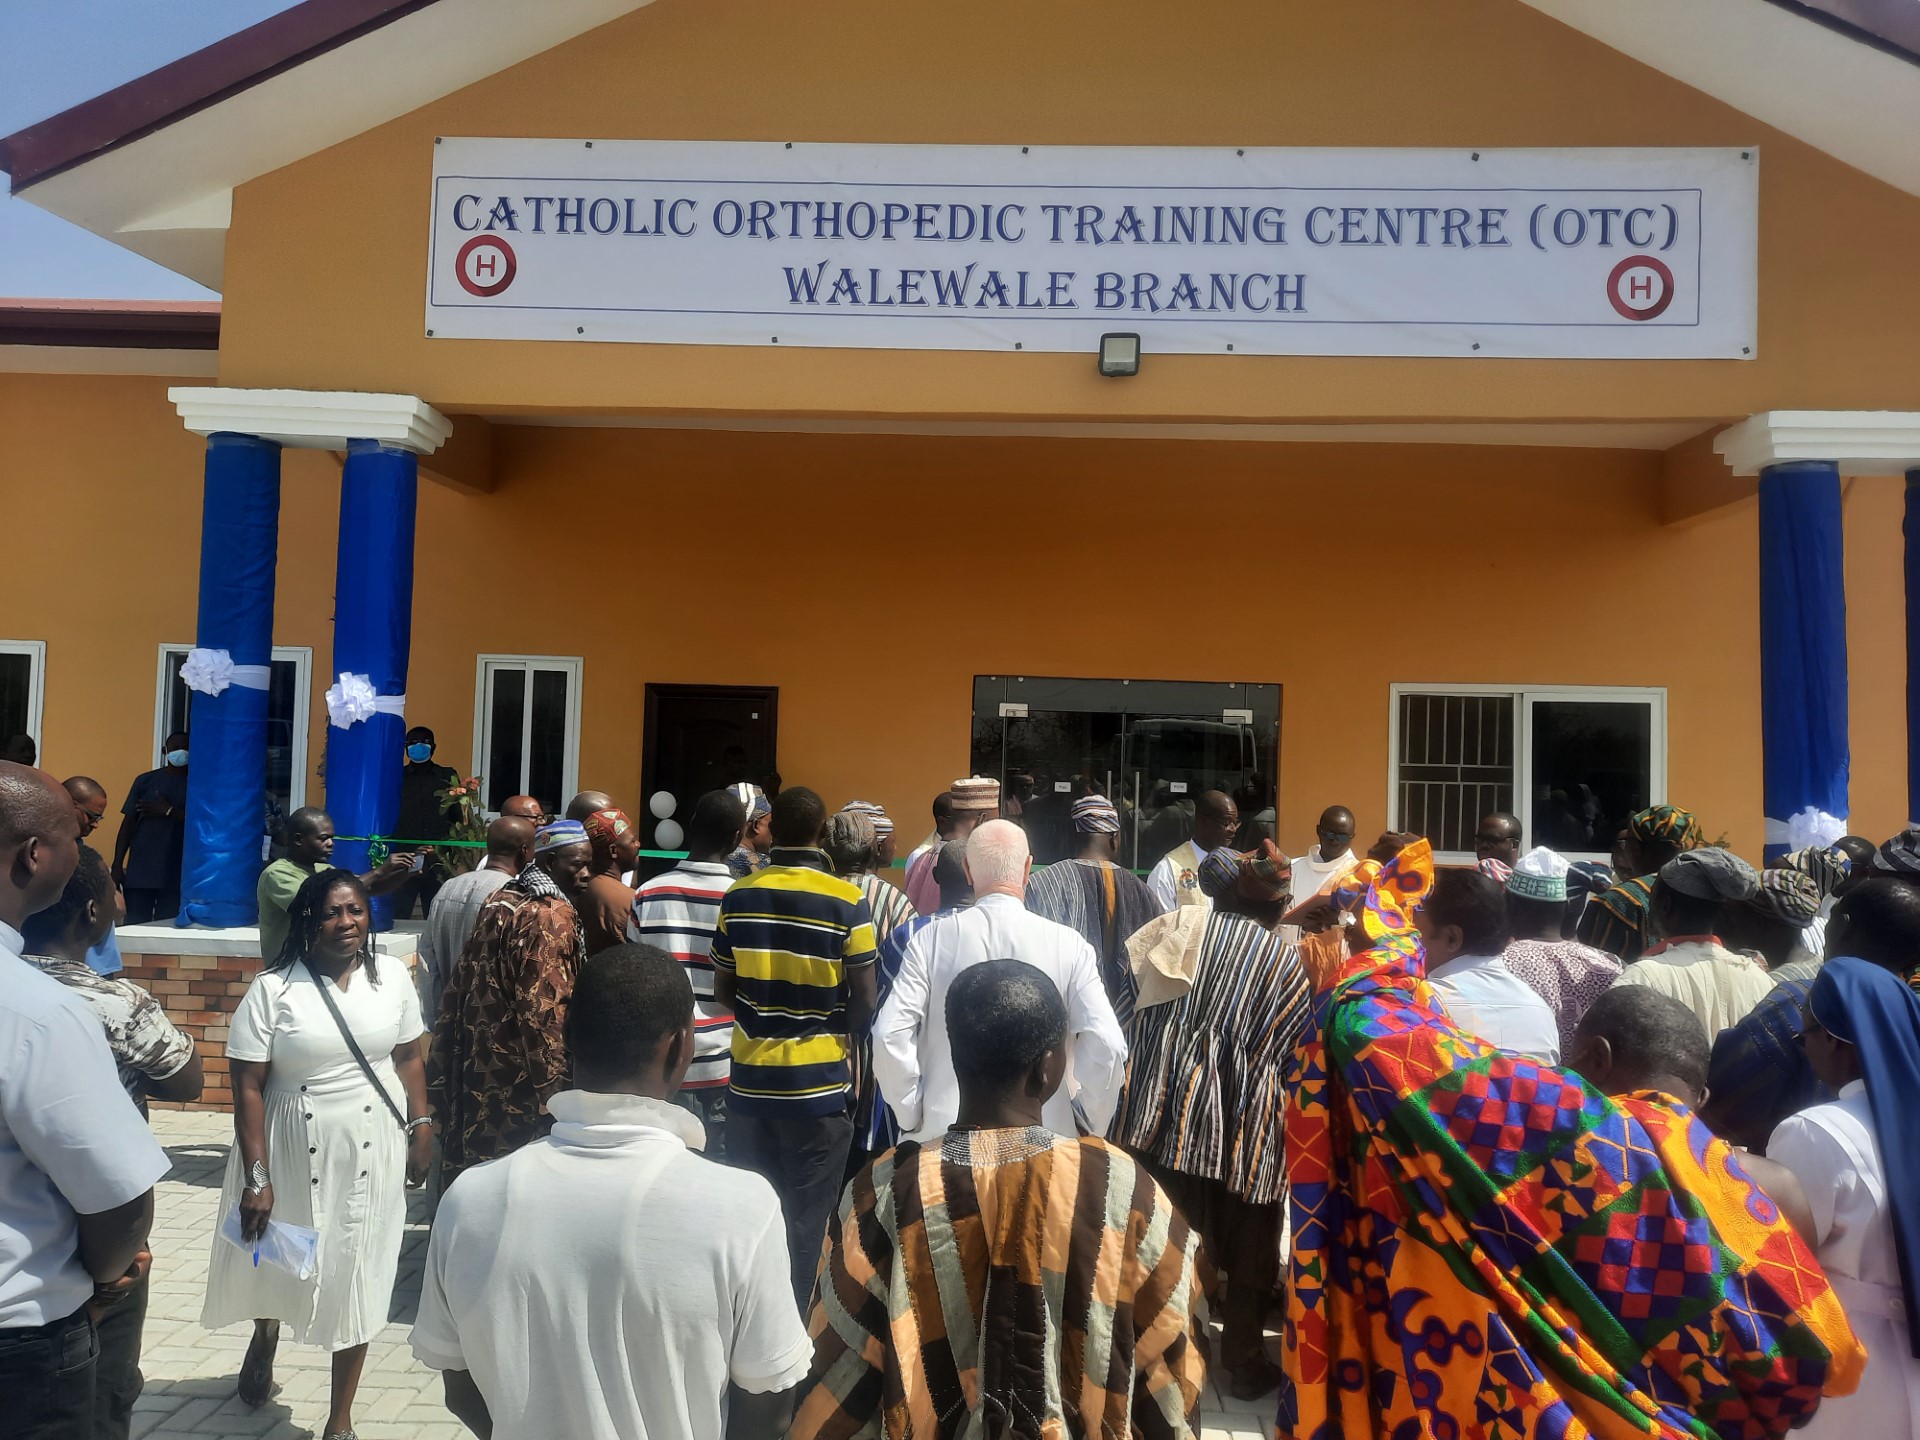 Walewale Orthopedic Training Centre remains closed to public despite being inaugurated